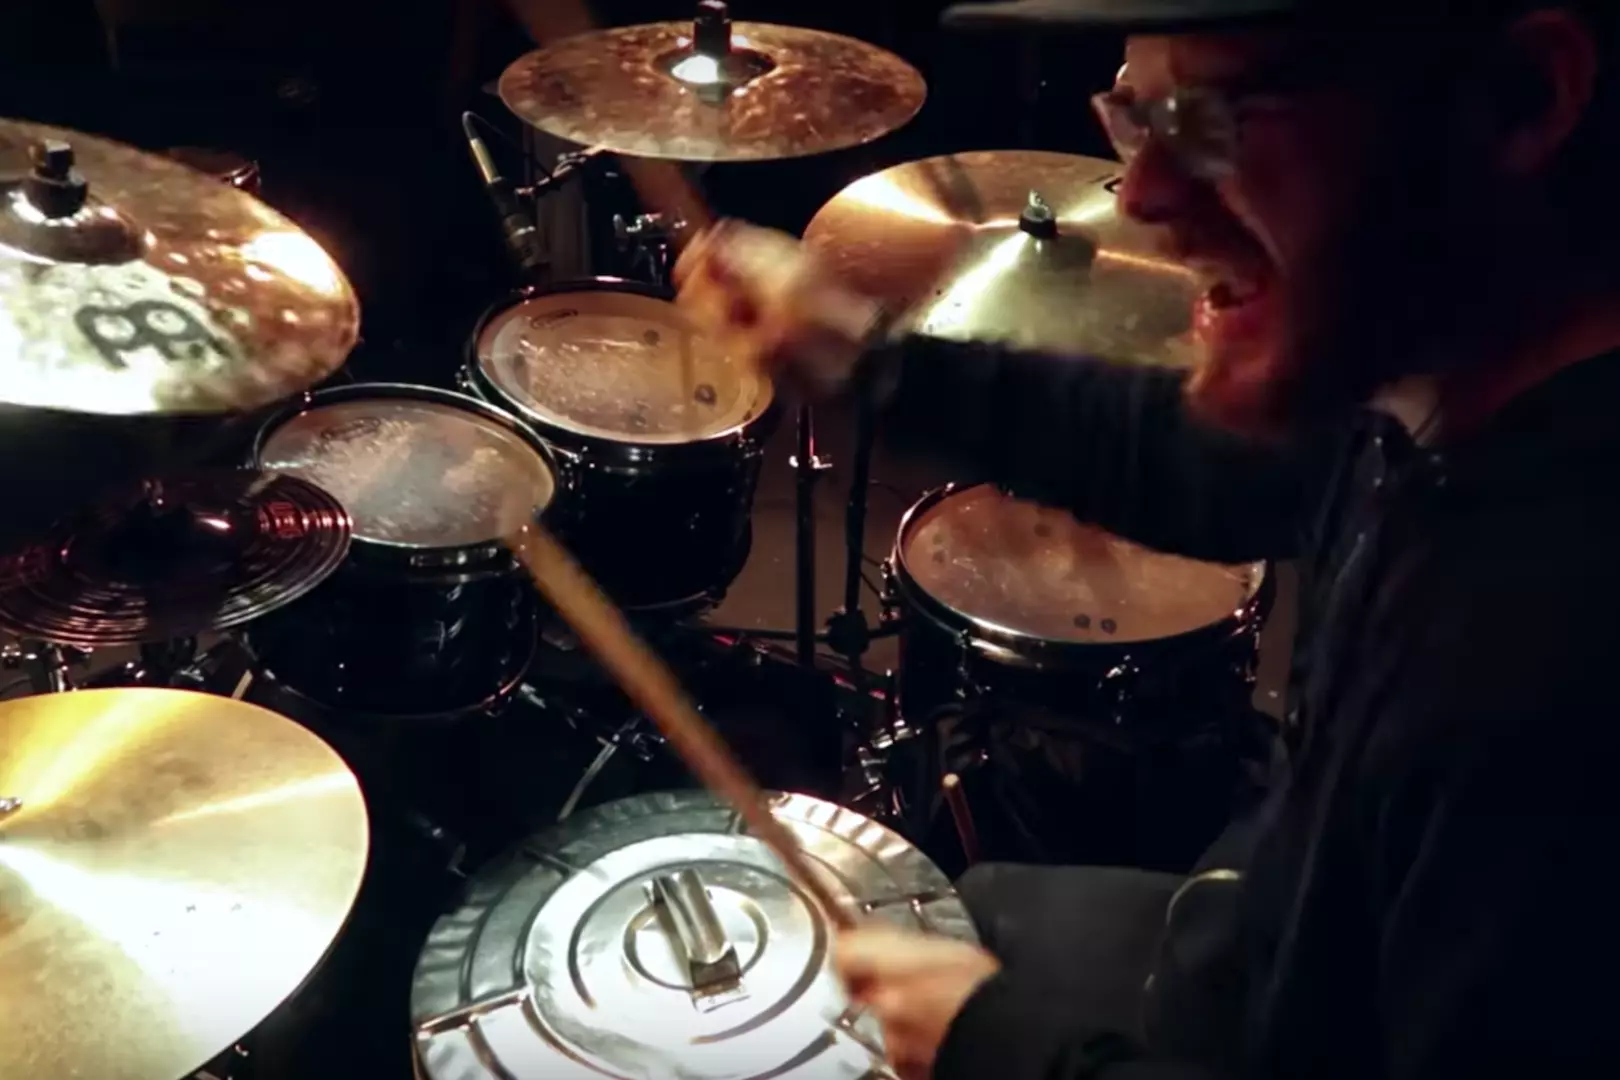 Metallica's 'Frantic' Sounds Better With Trash Can Snare